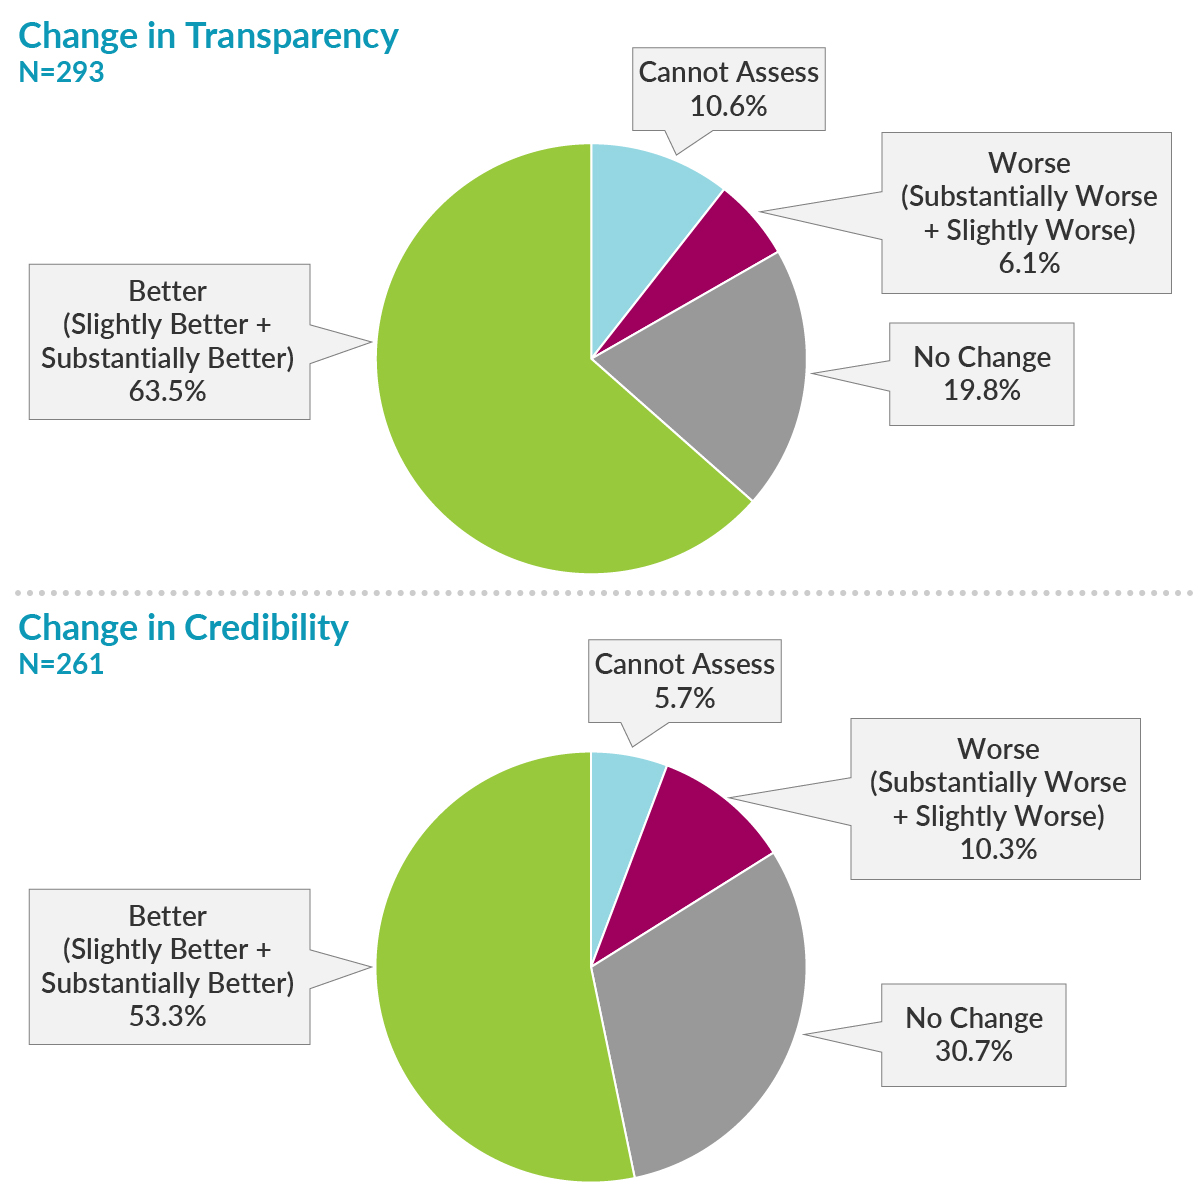 Change in Transparency figure